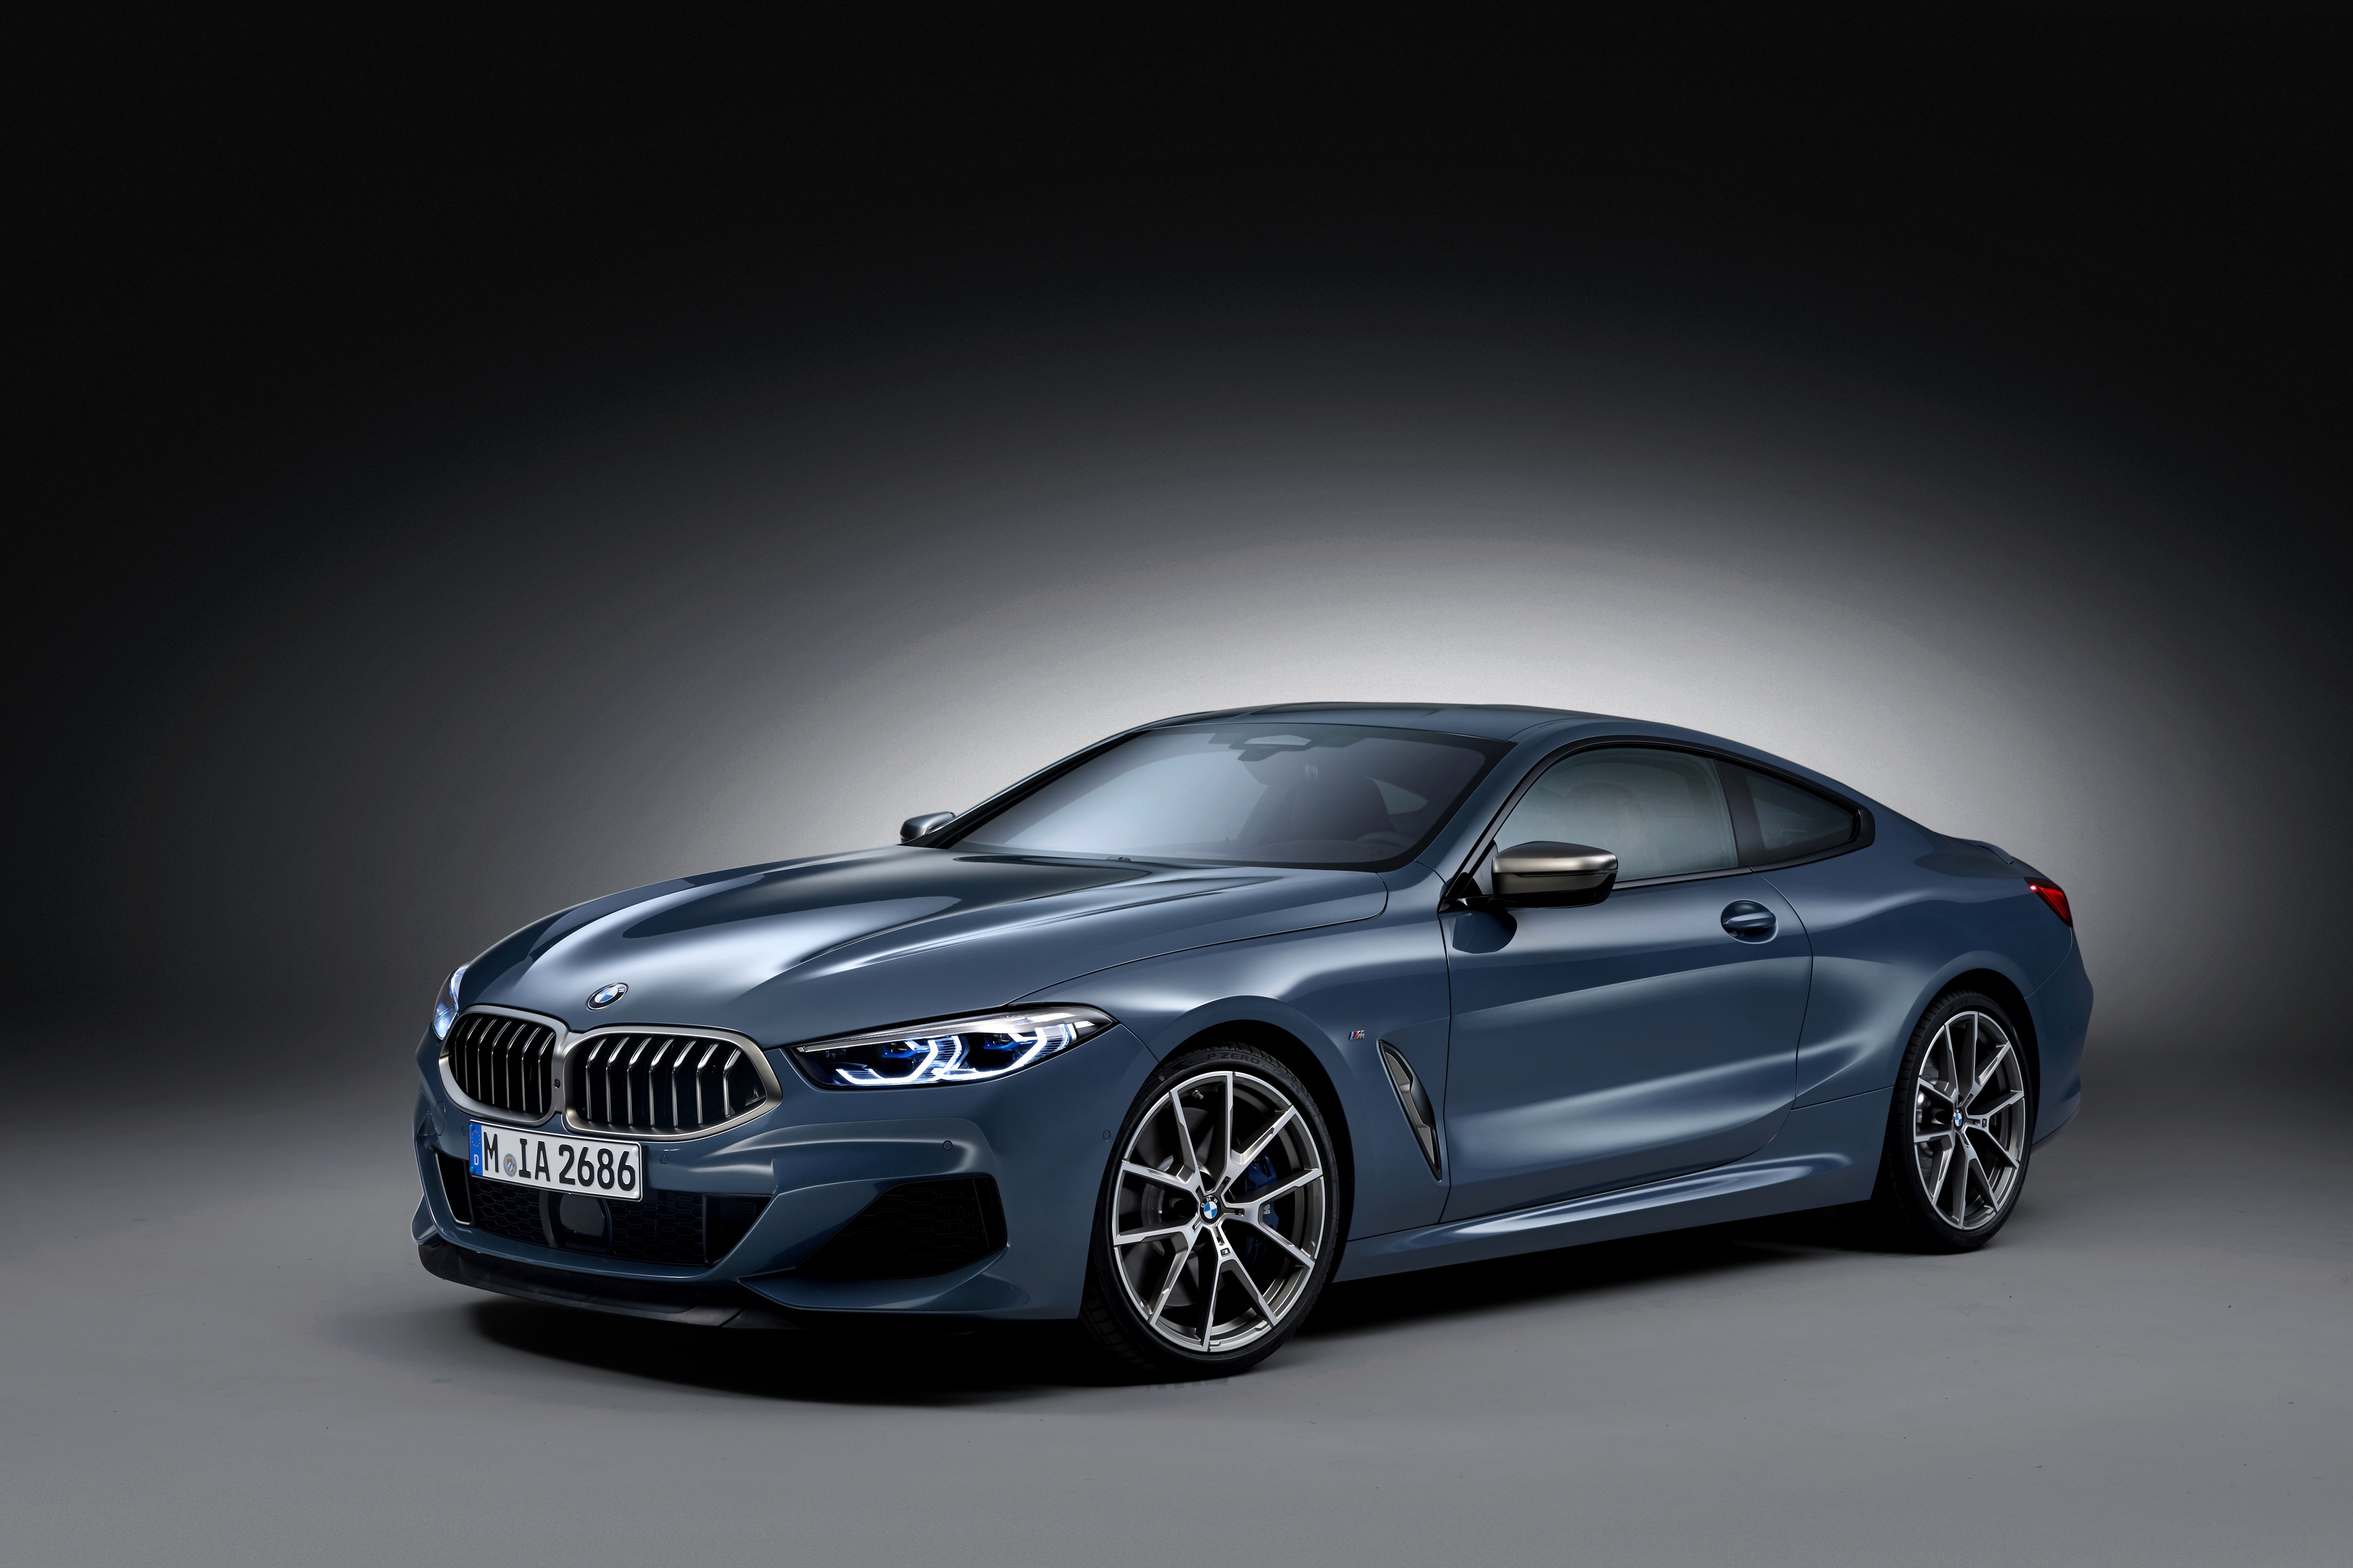  Bmw 8 Series HQ Background Images